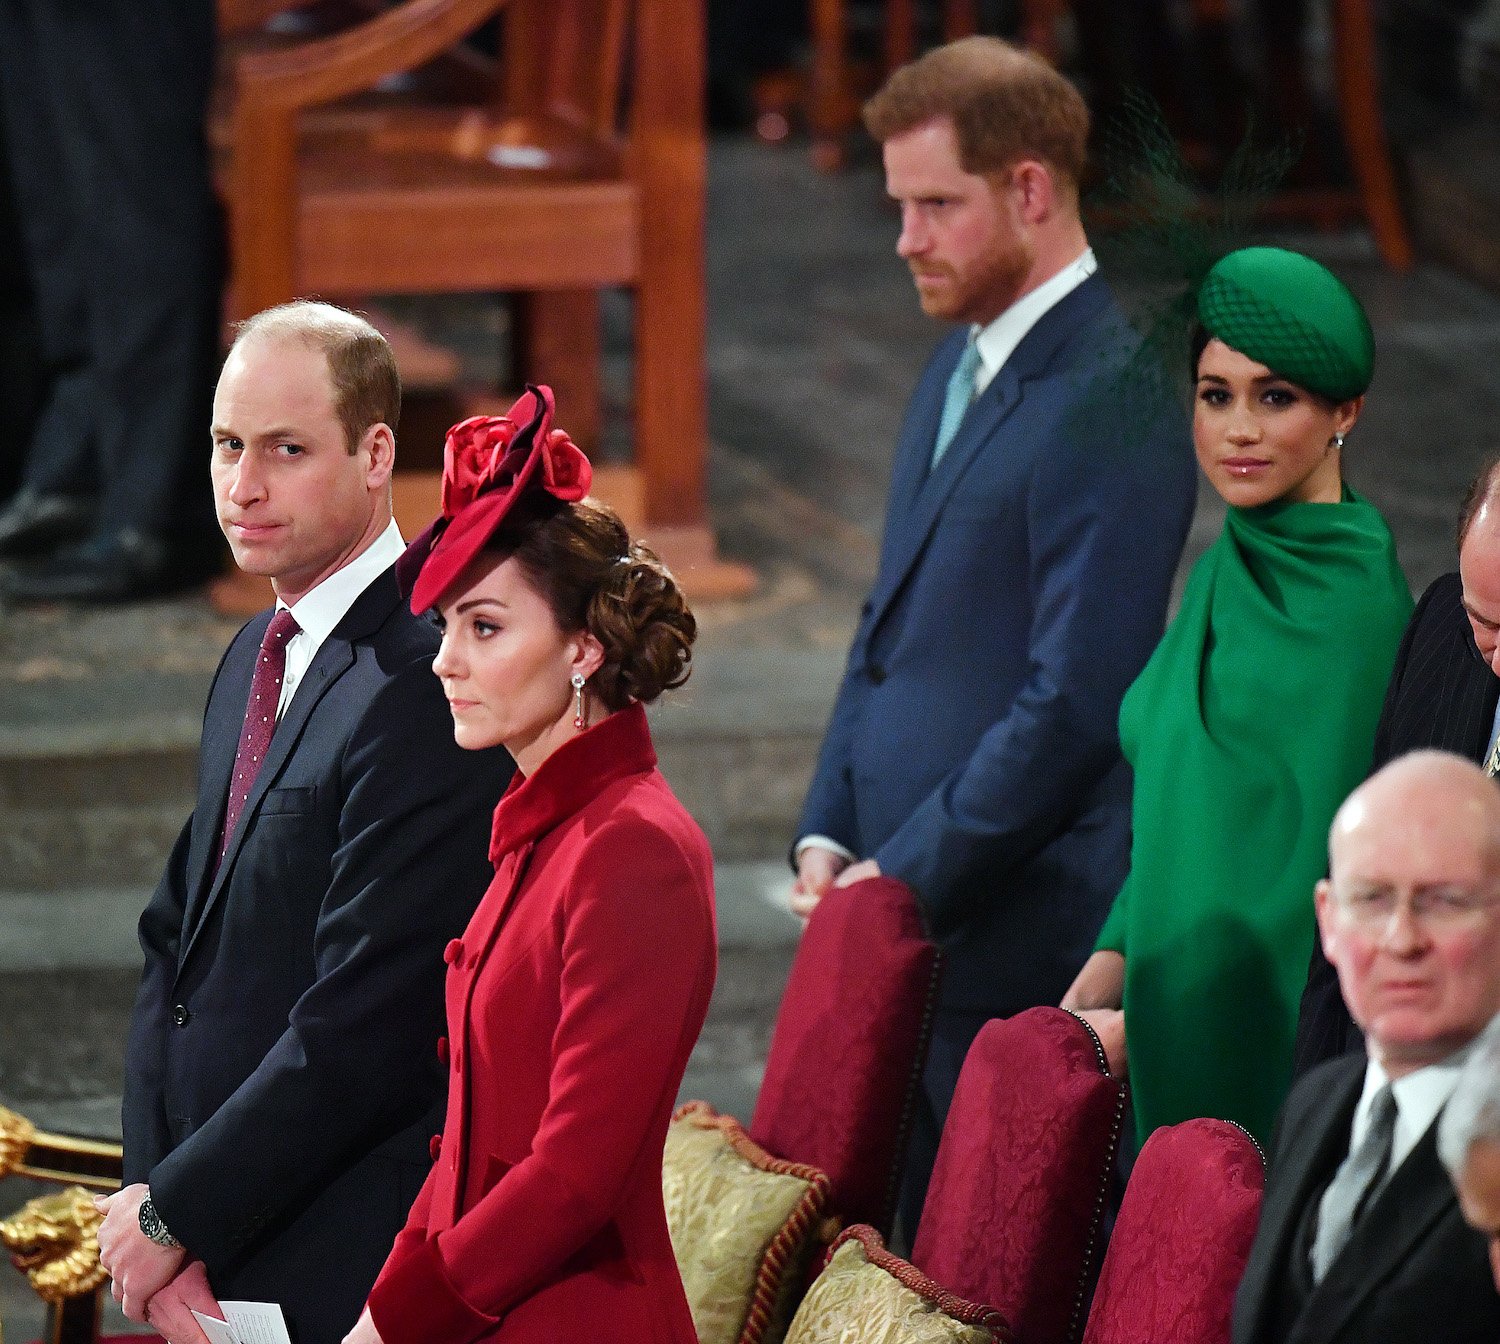 Prince William, Kate Middleton, Prince Harry, and Meghan Markle attend Commonwealth Day Celebrations at Westminster Abbey 2020